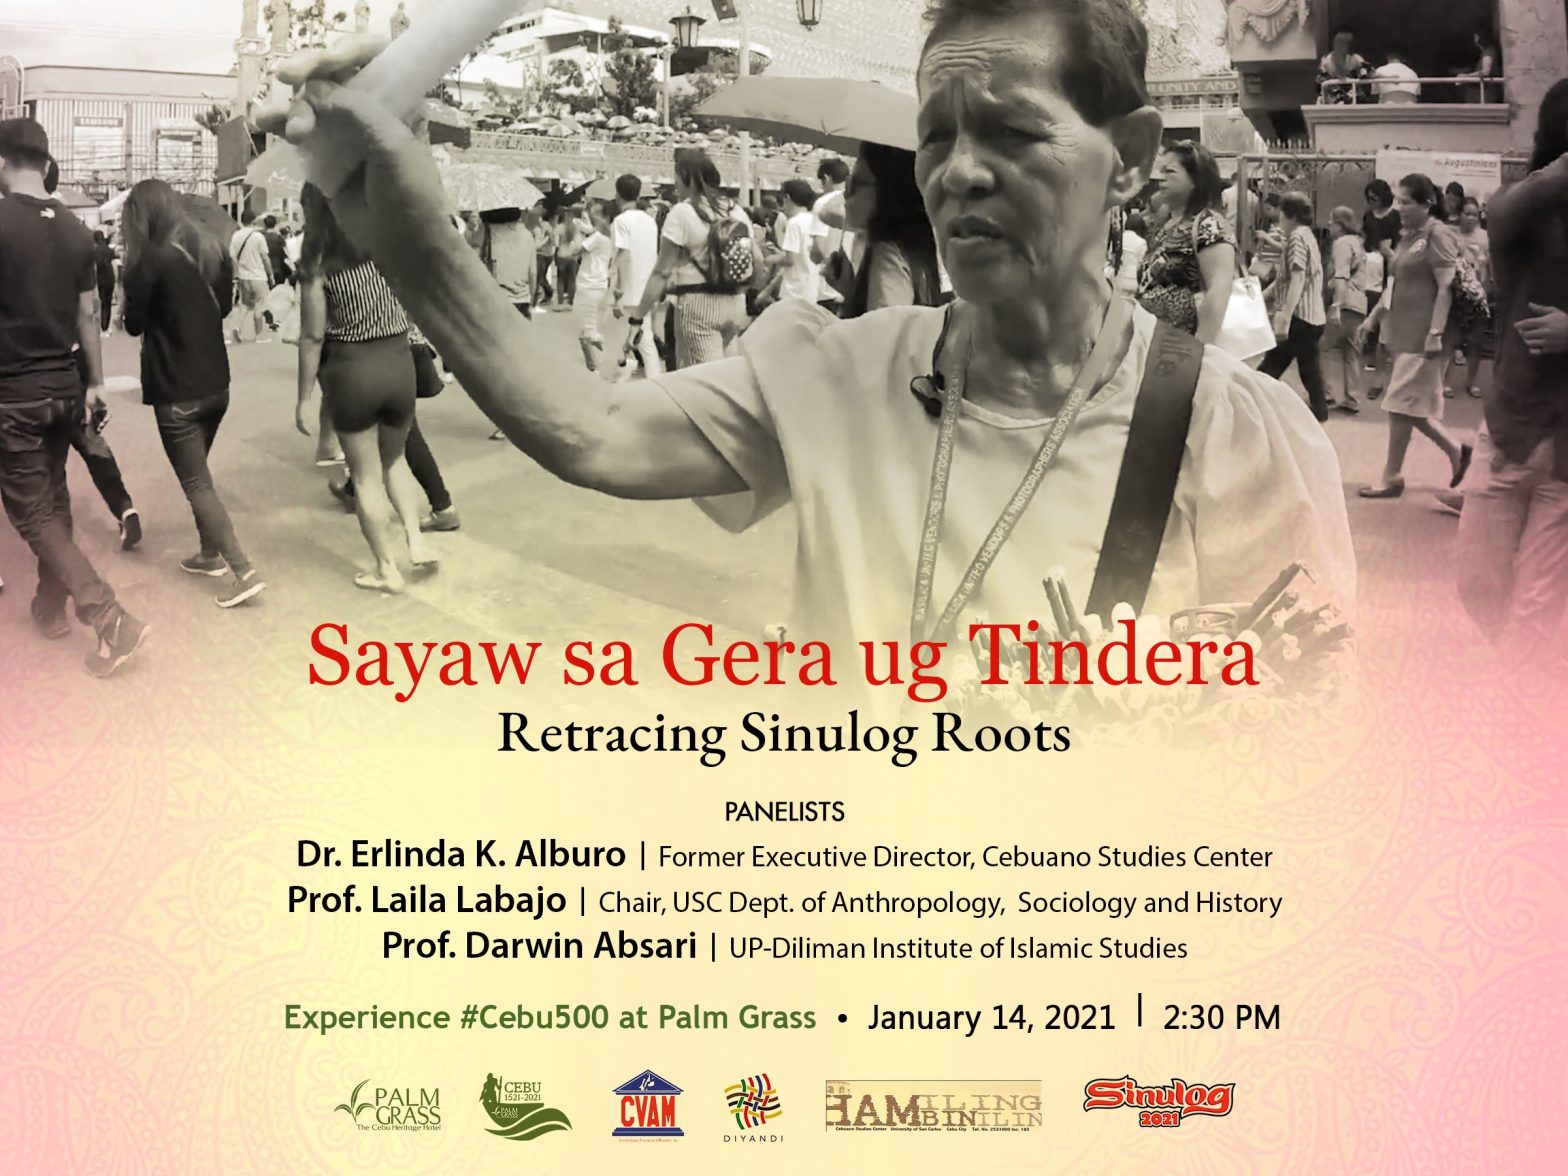 Scholars to trace roots of Sinulog dance, 500 year-old Cebuano devotion to Sto. Niño